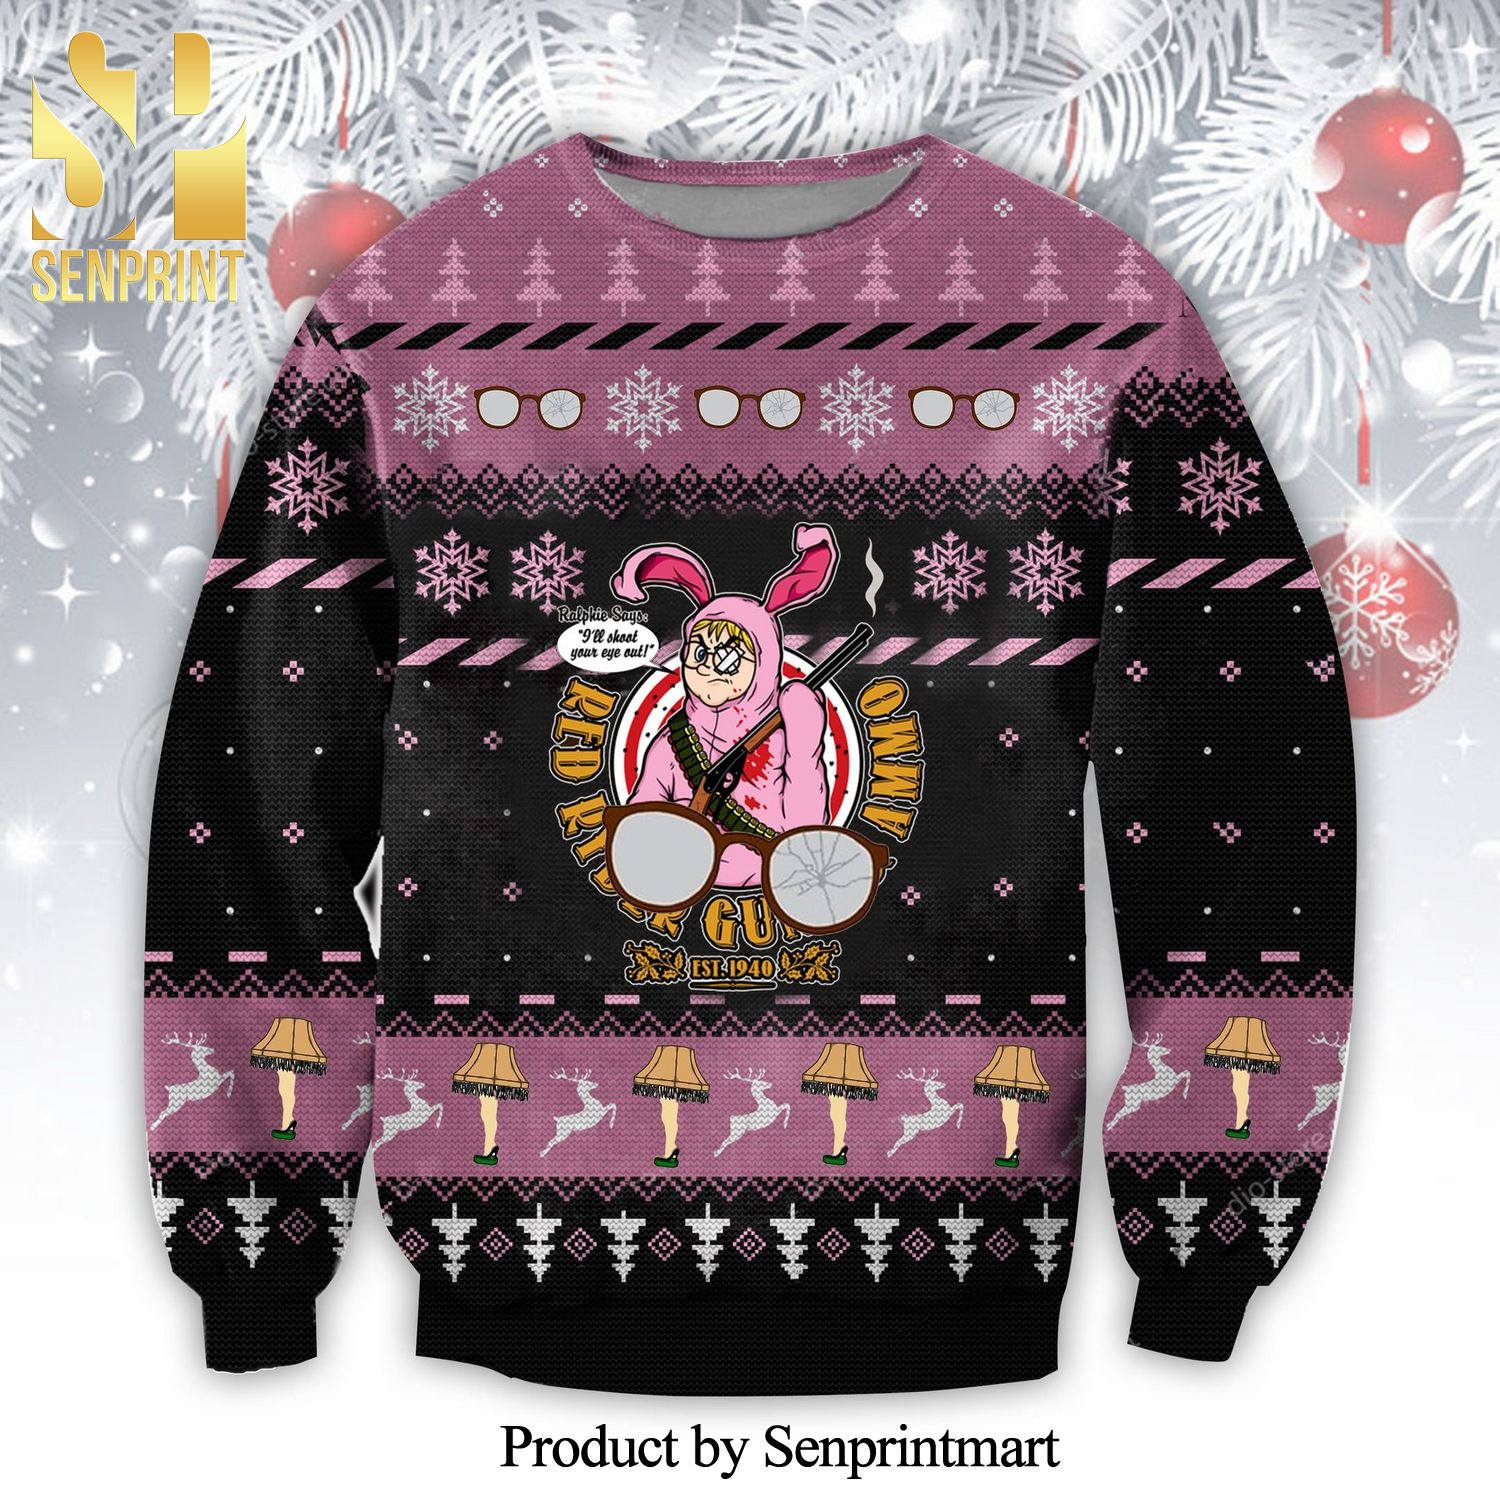 Bunny Pajamas Red Ryder BB Gun Ammo A Christmas Story Knitted Ugly Christmas Sweater